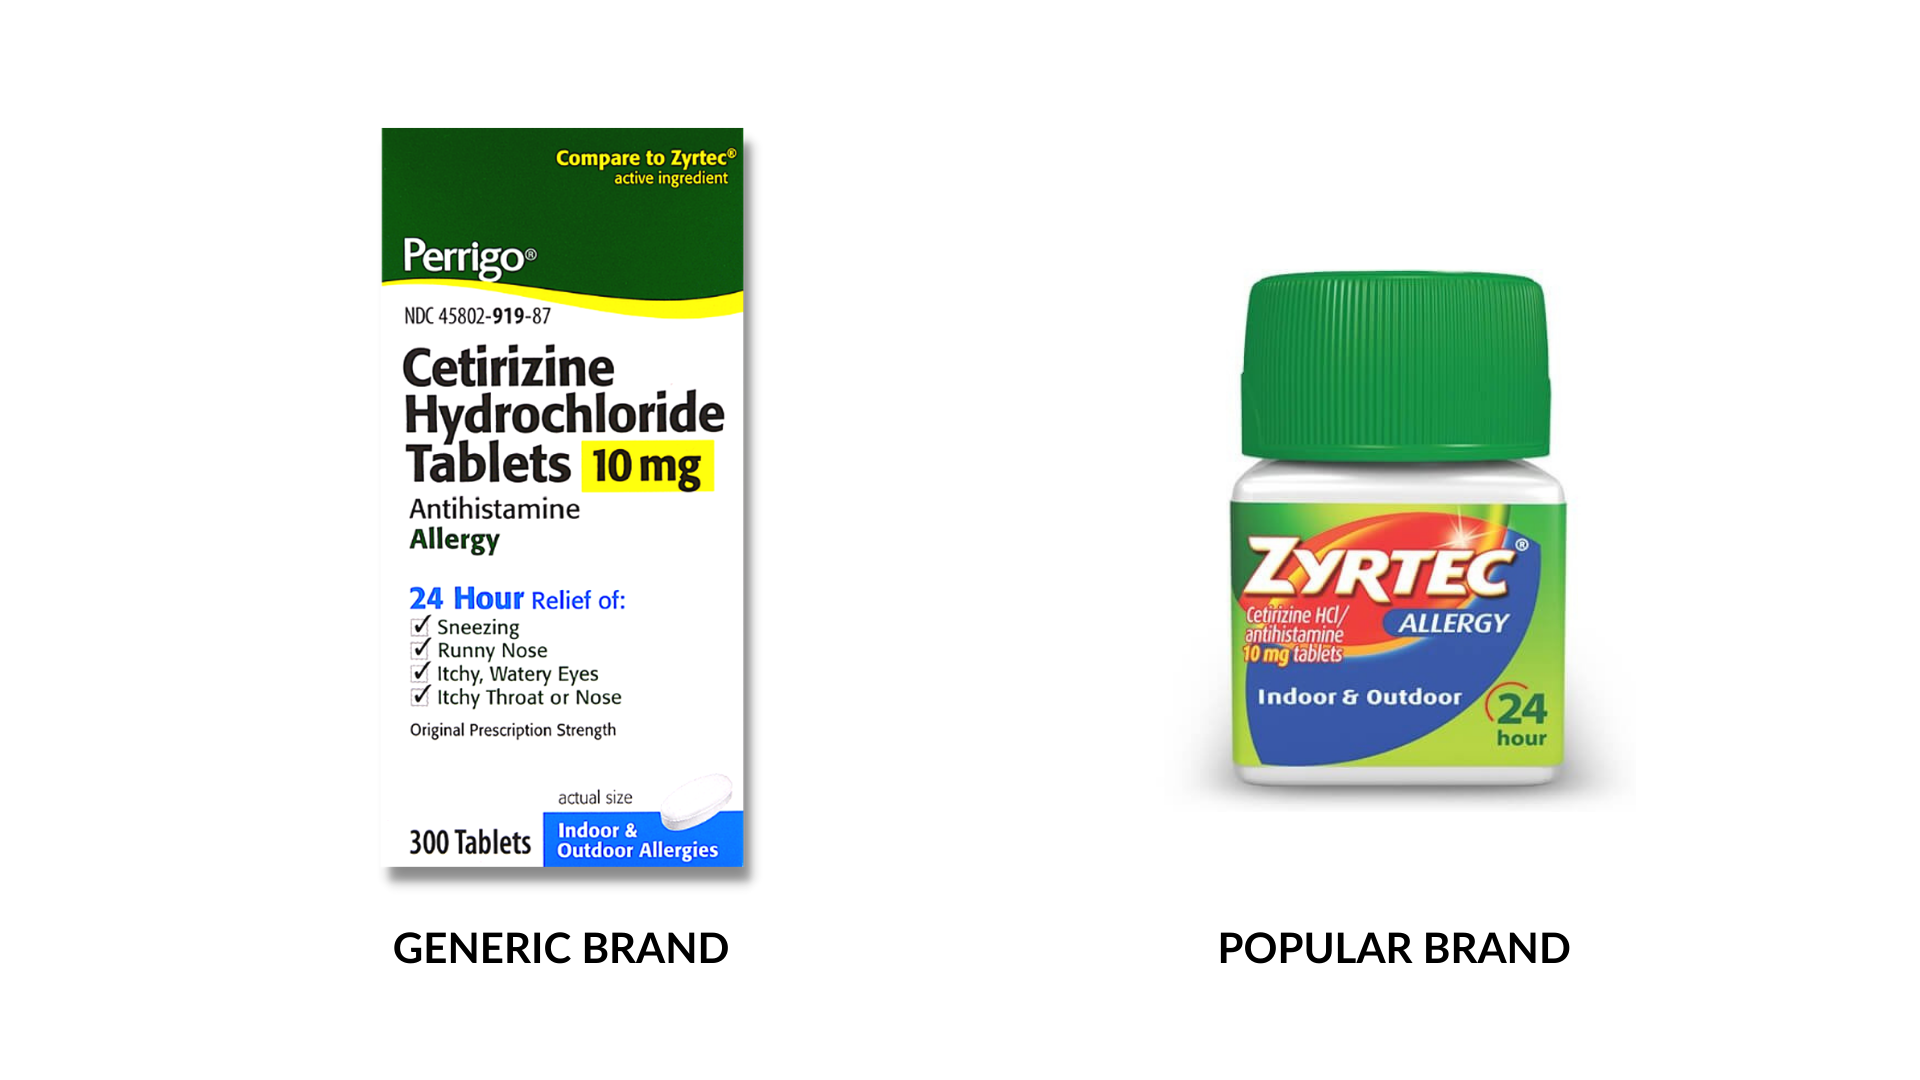 Original Vs Generic Drugs. Is there a difference? Which is better? 